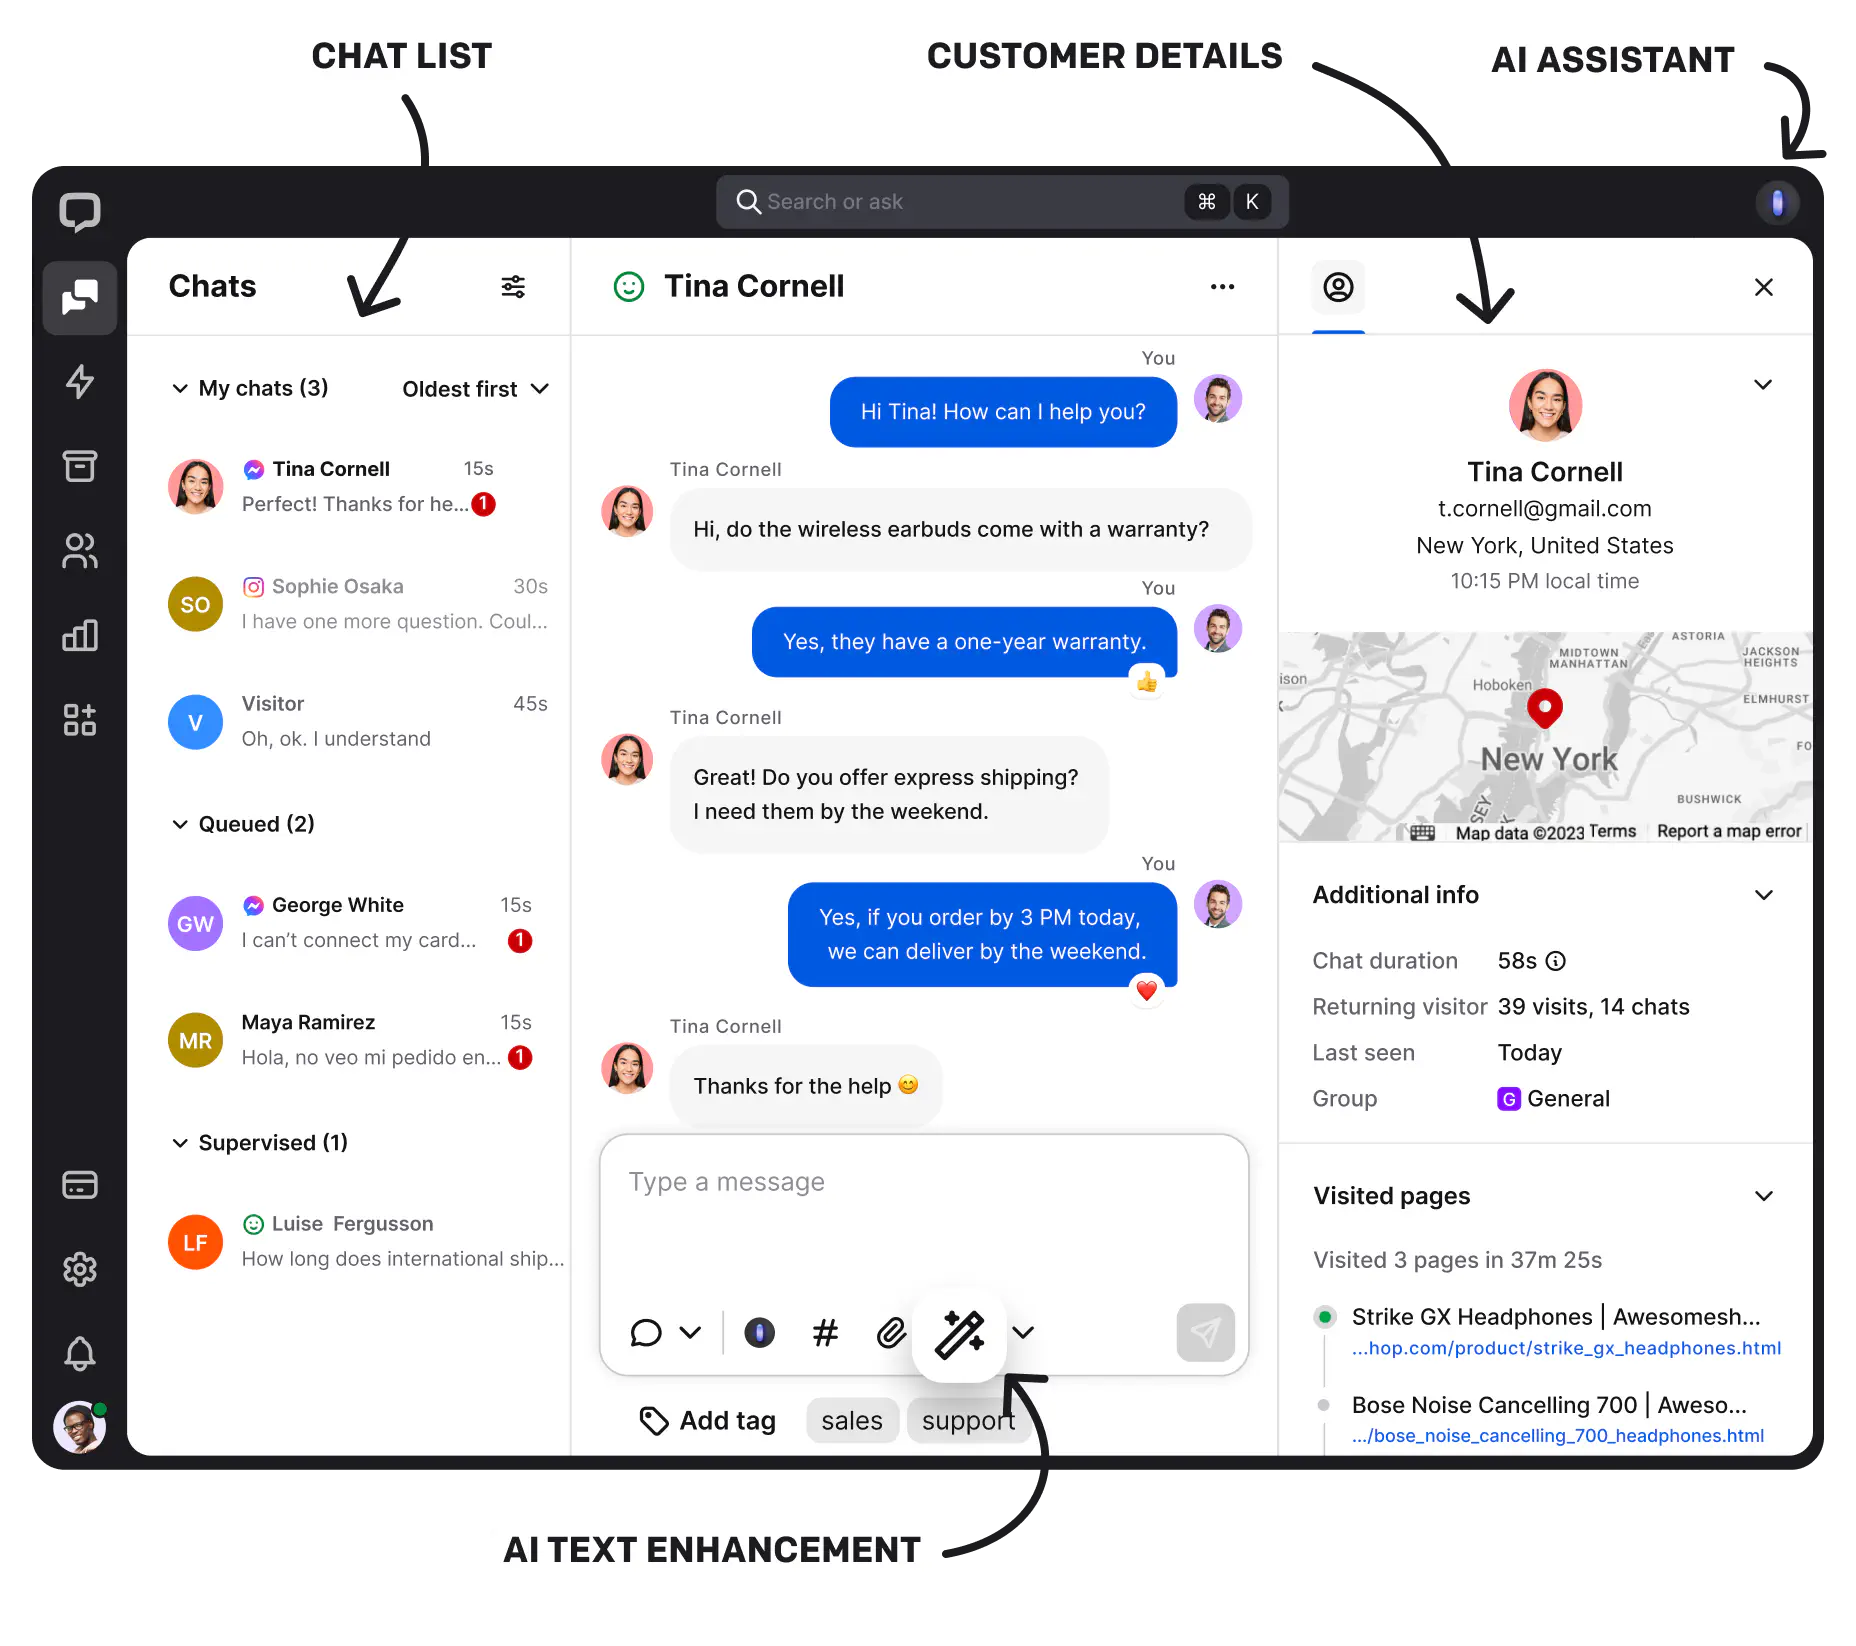 The look of the LiveChat app from the inside which shows the chat list and its features: AI text enhancement, Customer Details, and AI Assistant.